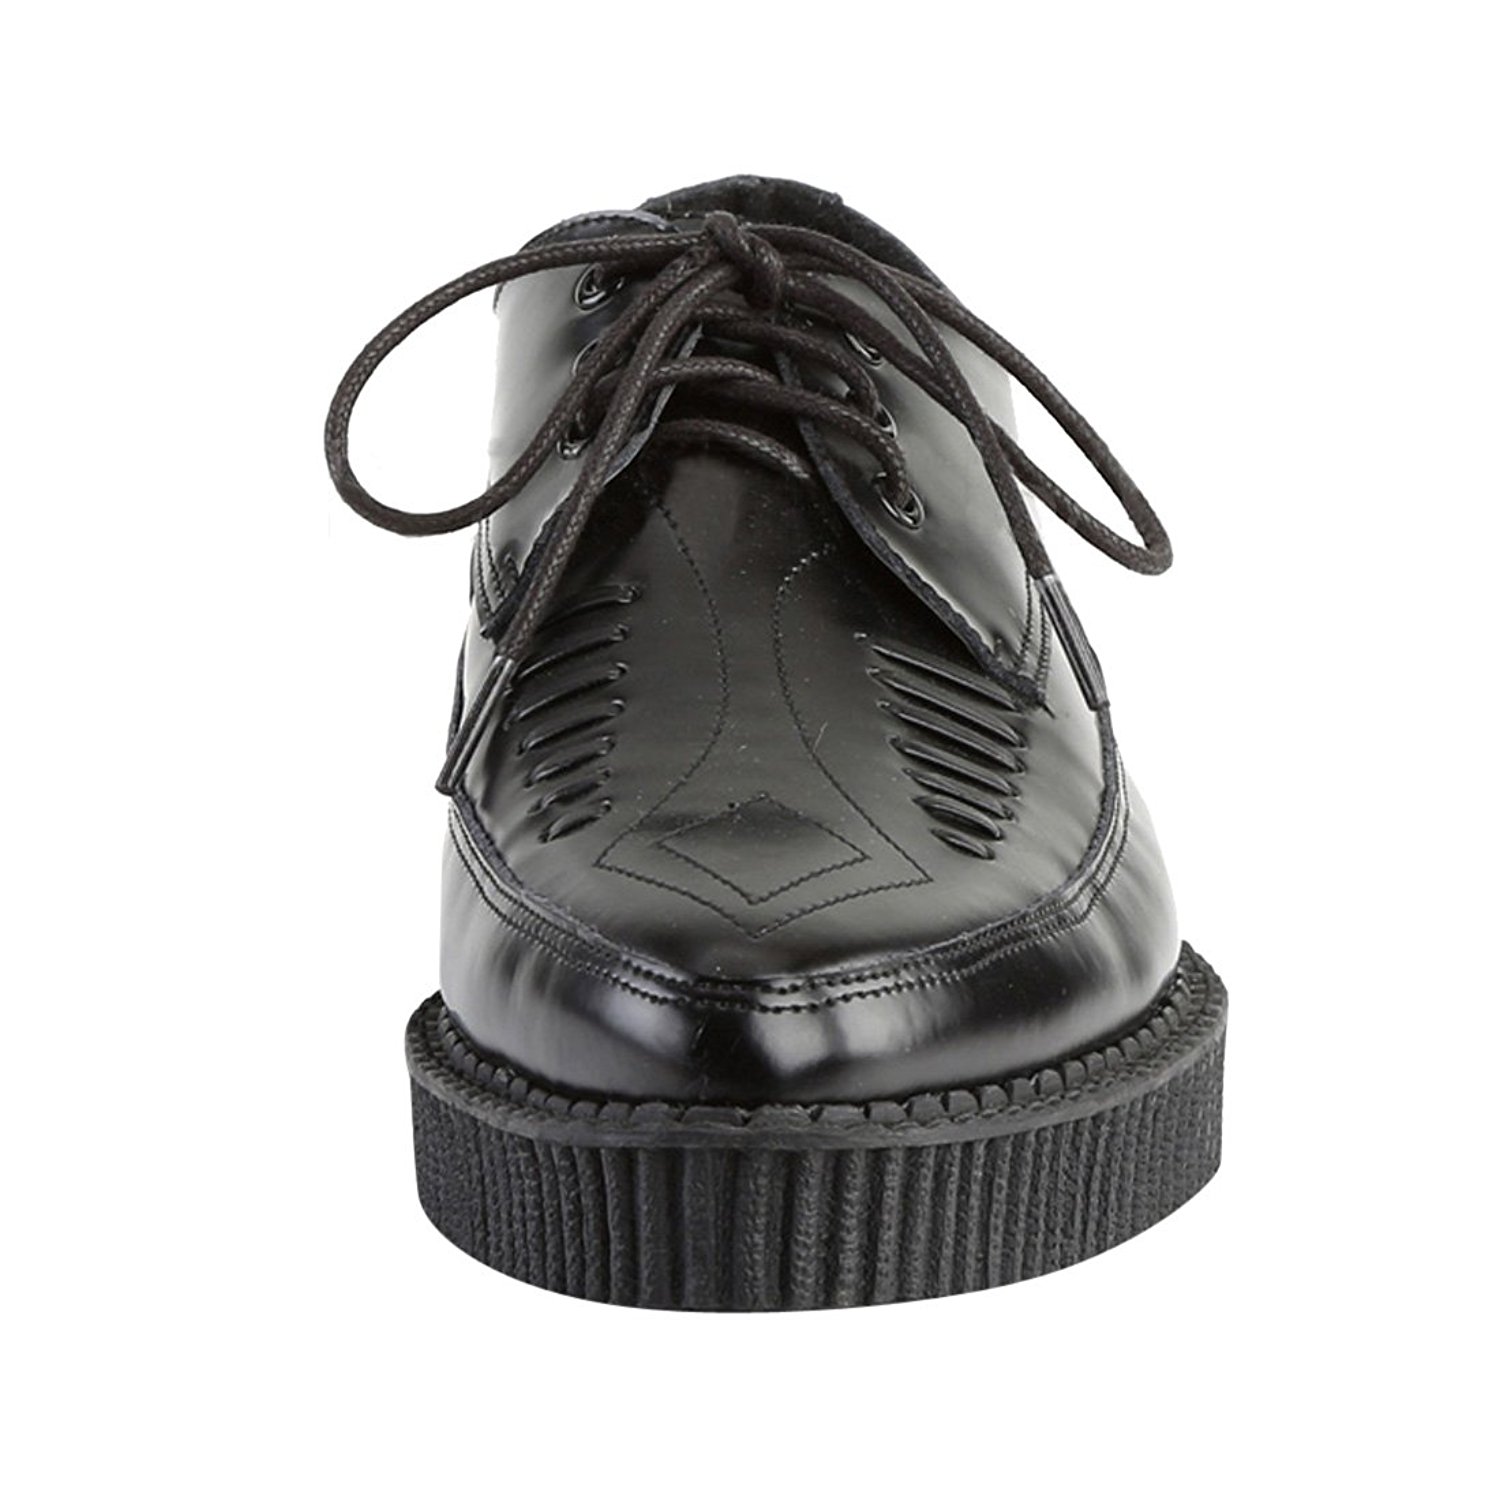 Leather 3 Cm Creeper 712 Platform Mens Creepers Shoes